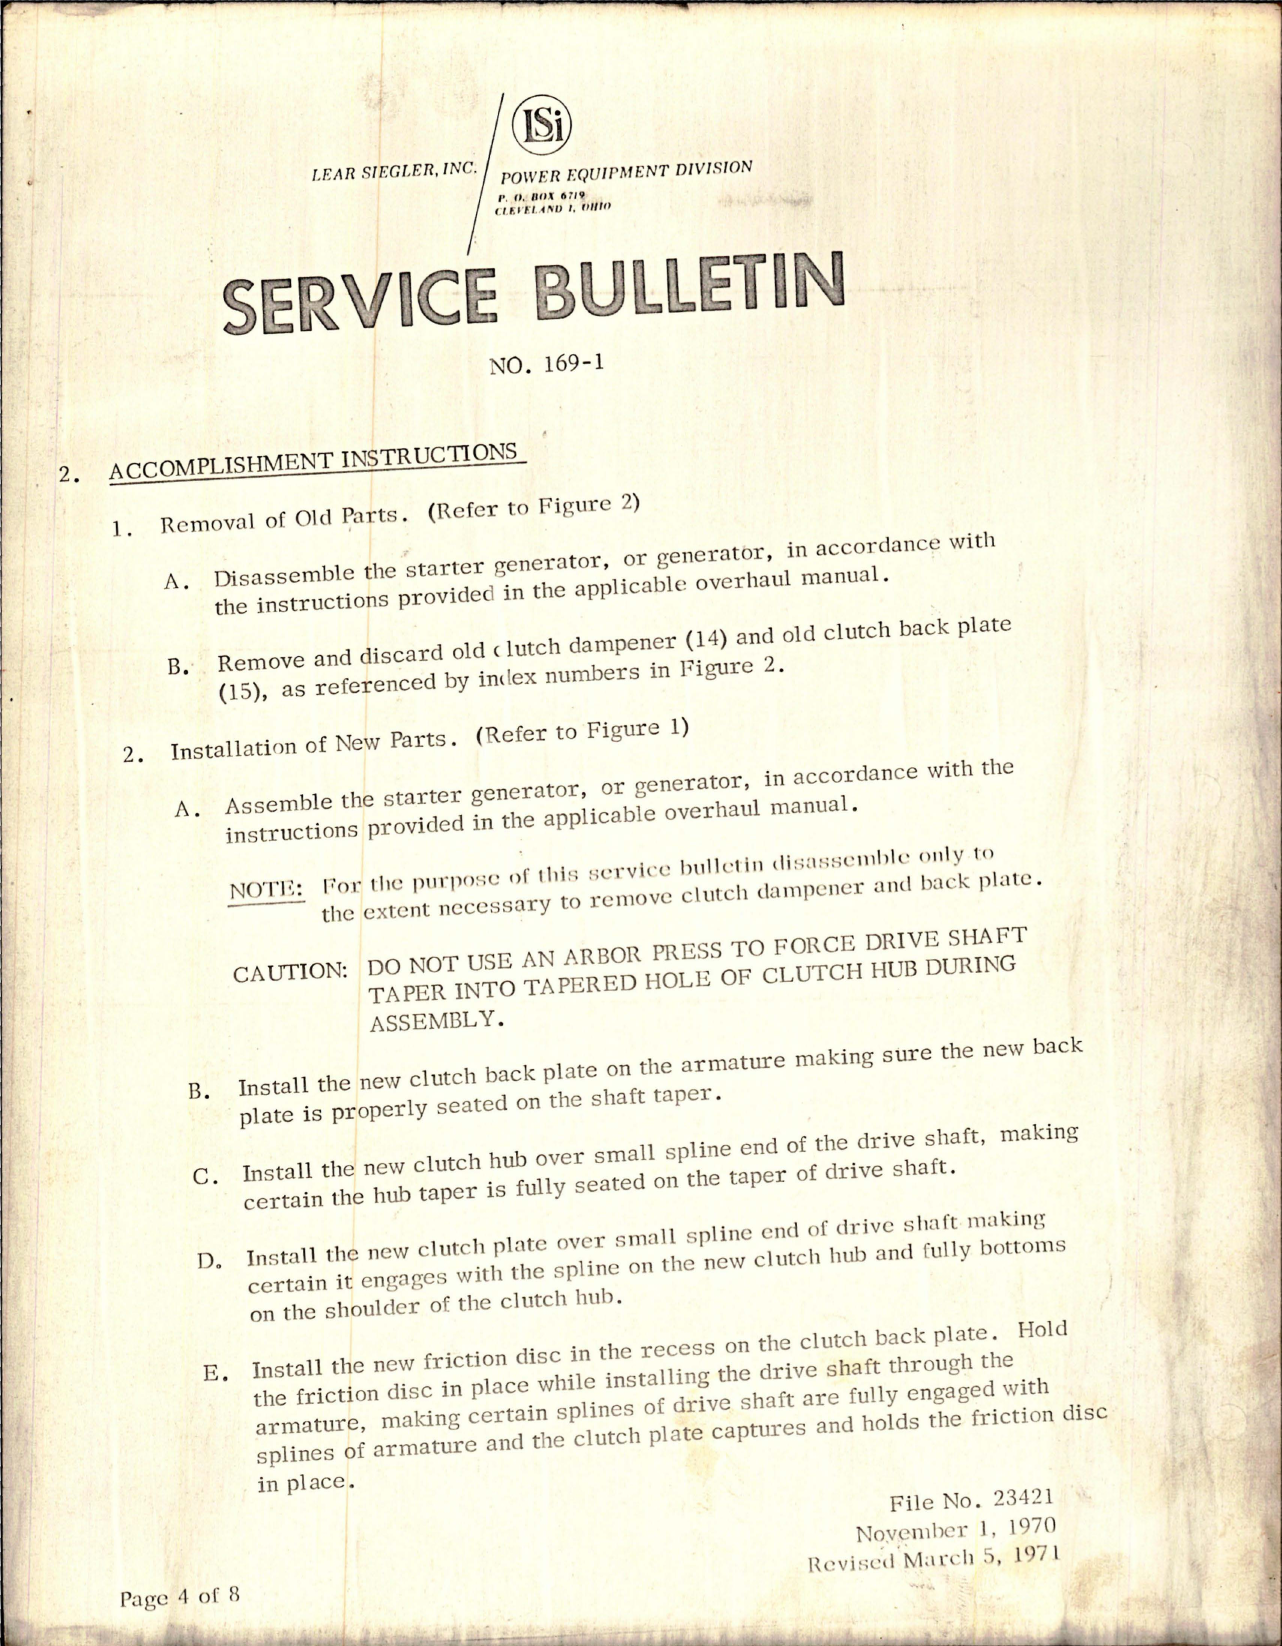 Sample page 7 from AirCorps Library document: Service Bulletin No. 169-1 for DC Generator and Starter Generators - Usage of New Clutch Dampener and Back Plate Assemblies